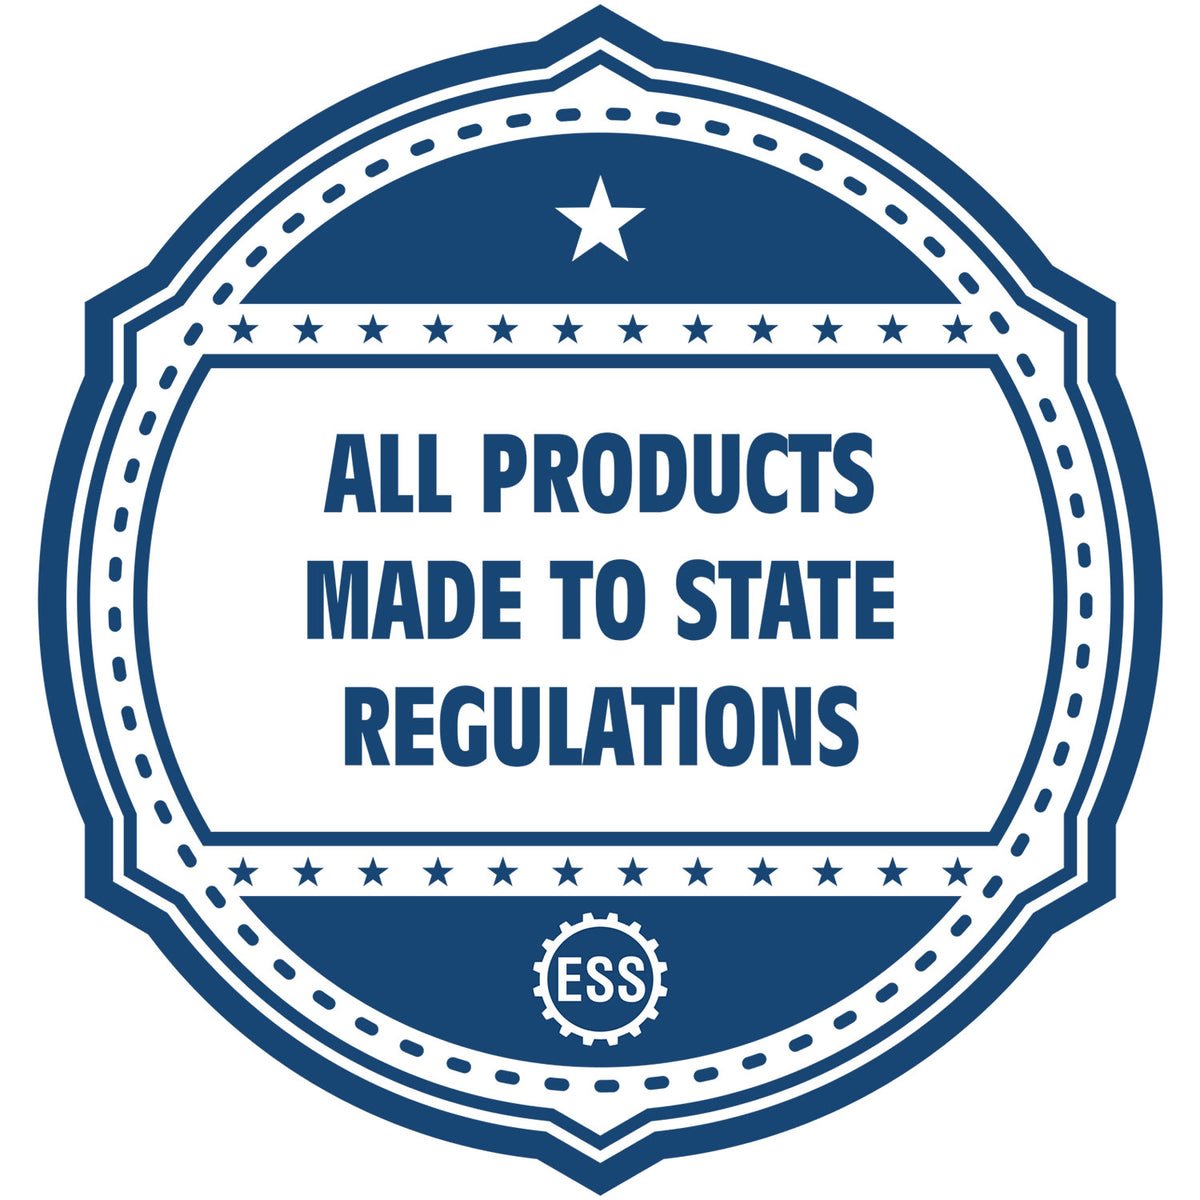 An icon or badge element for the Self-Inking Texas PE Stamp showing that this product is made in compliance with state regulations.